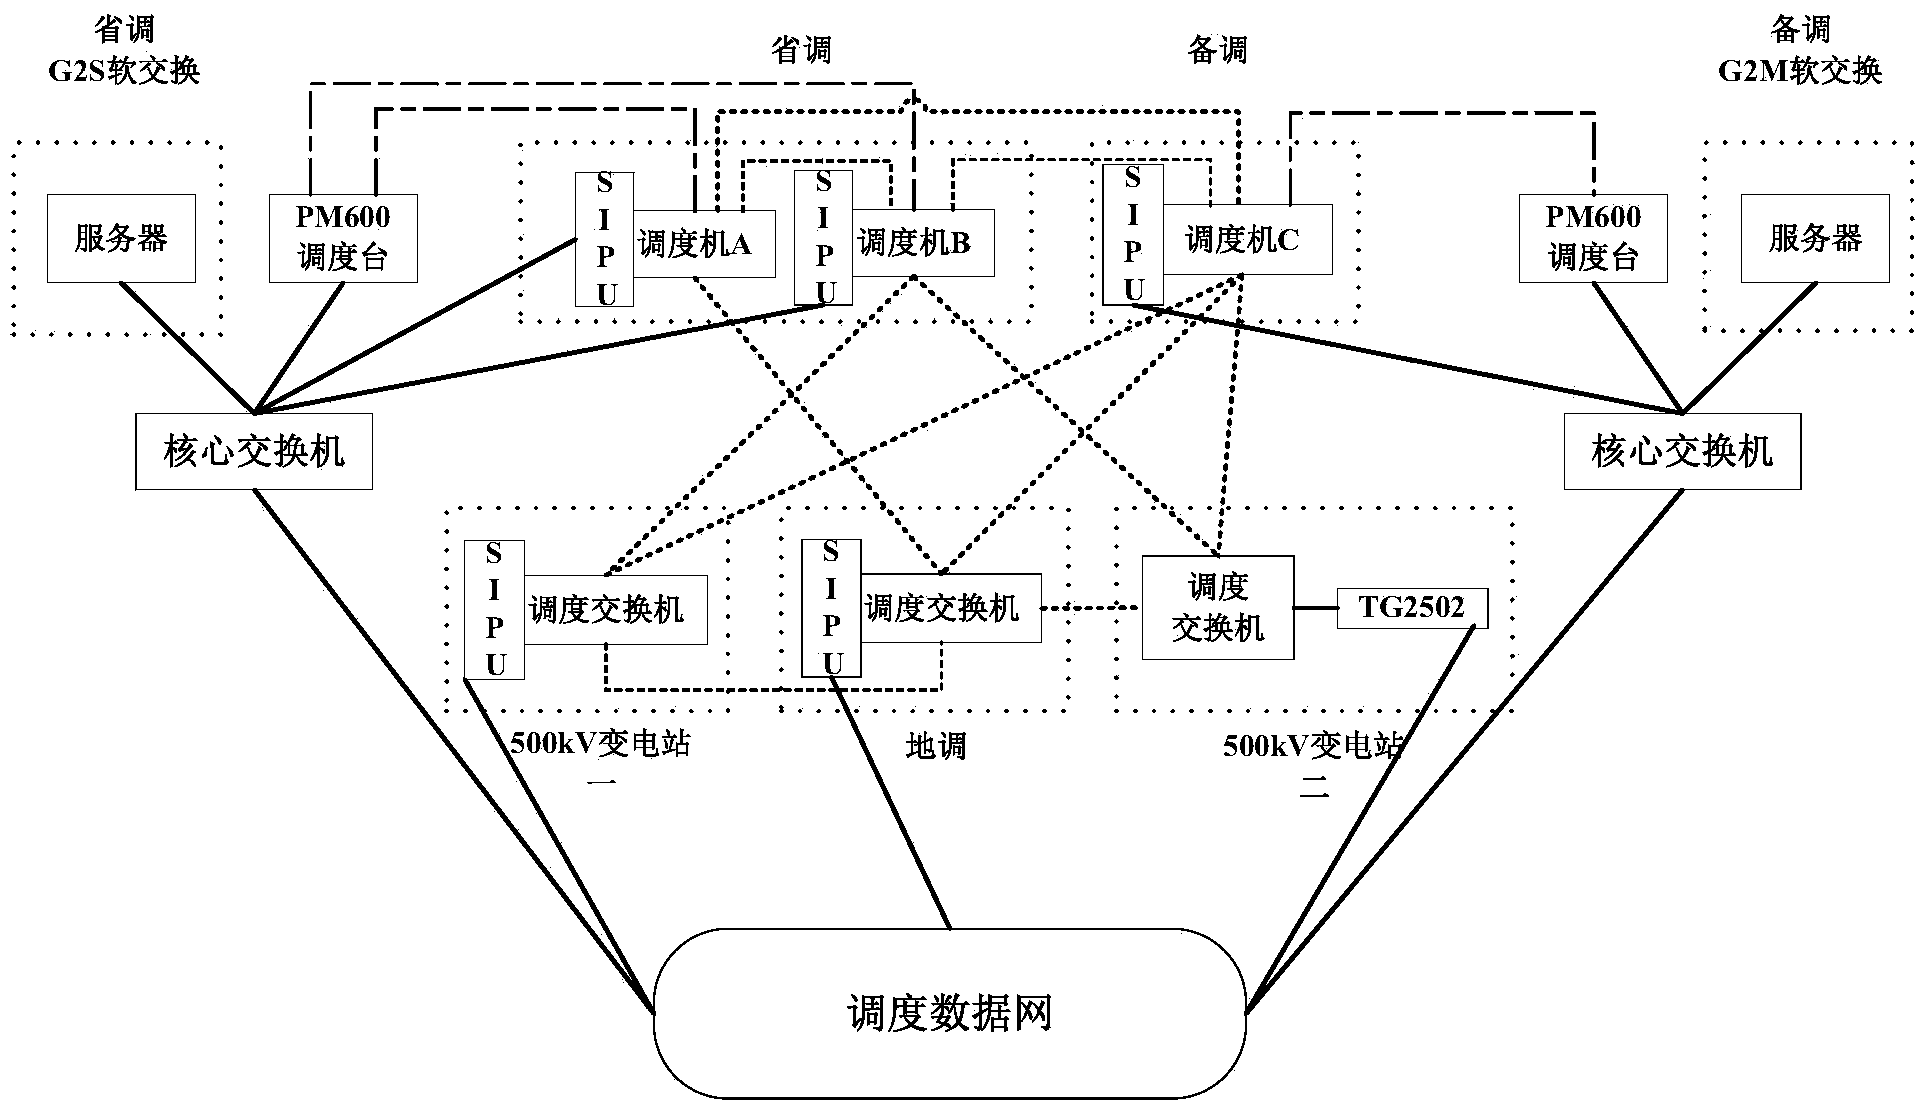 Power dispatching switching network structure